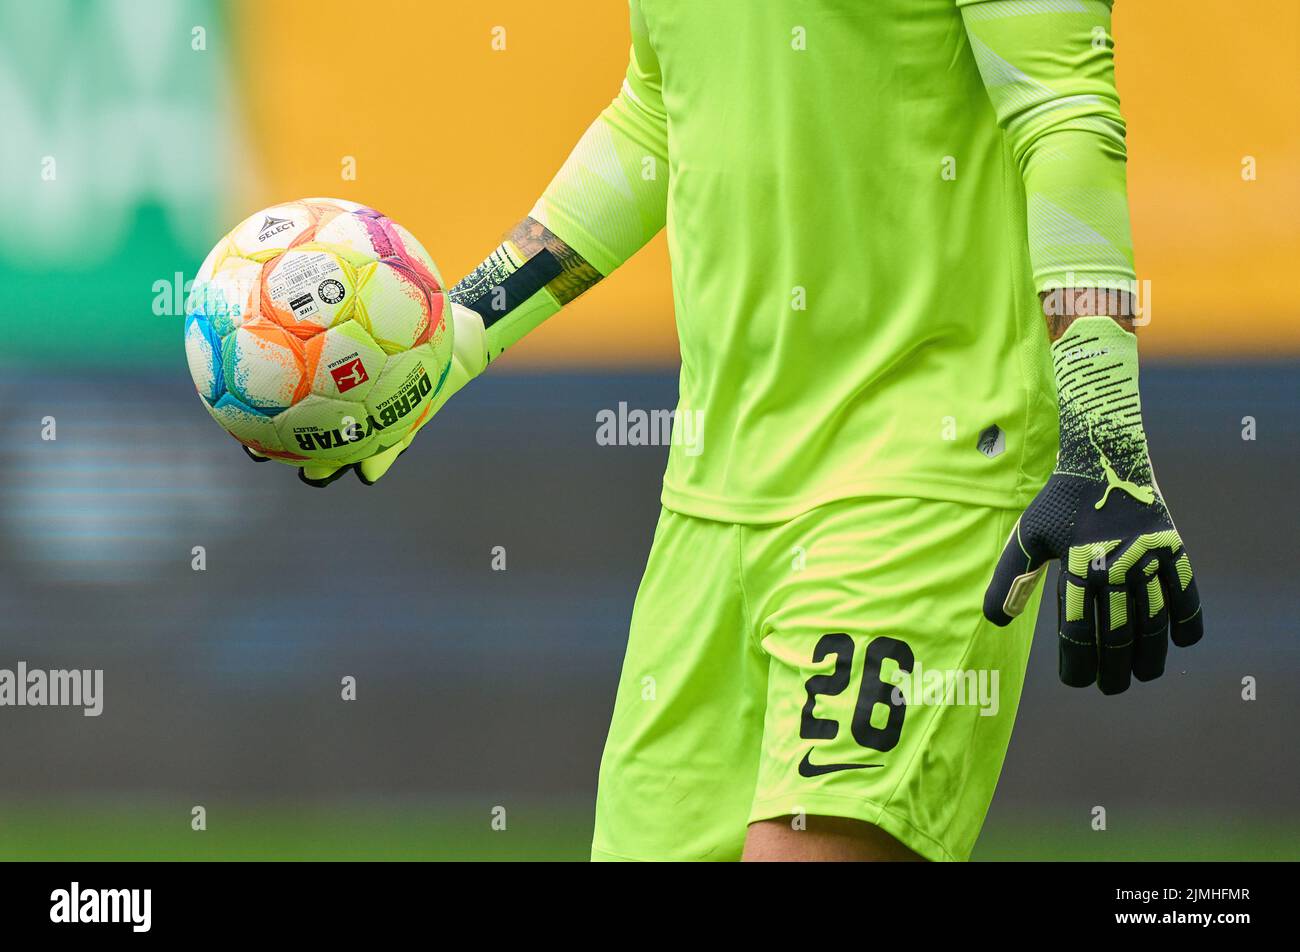 Mark FLEKKEN, goalkeeper FRG 26  in the match FC AUGSBURG - SC FREIBURG 0-4 1.German Football League on Aug 06, 2022 in Augsburg, Germany. Season 2022/2023, matchday 1, 1.Bundesliga, FCB, Munich, 1.Spieltag © Peter Schatz / Alamy Live News    - DFL REGULATIONS PROHIBIT ANY USE OF PHOTOGRAPHS as IMAGE SEQUENCES and/or QUASI-VIDEO - Stock Photo